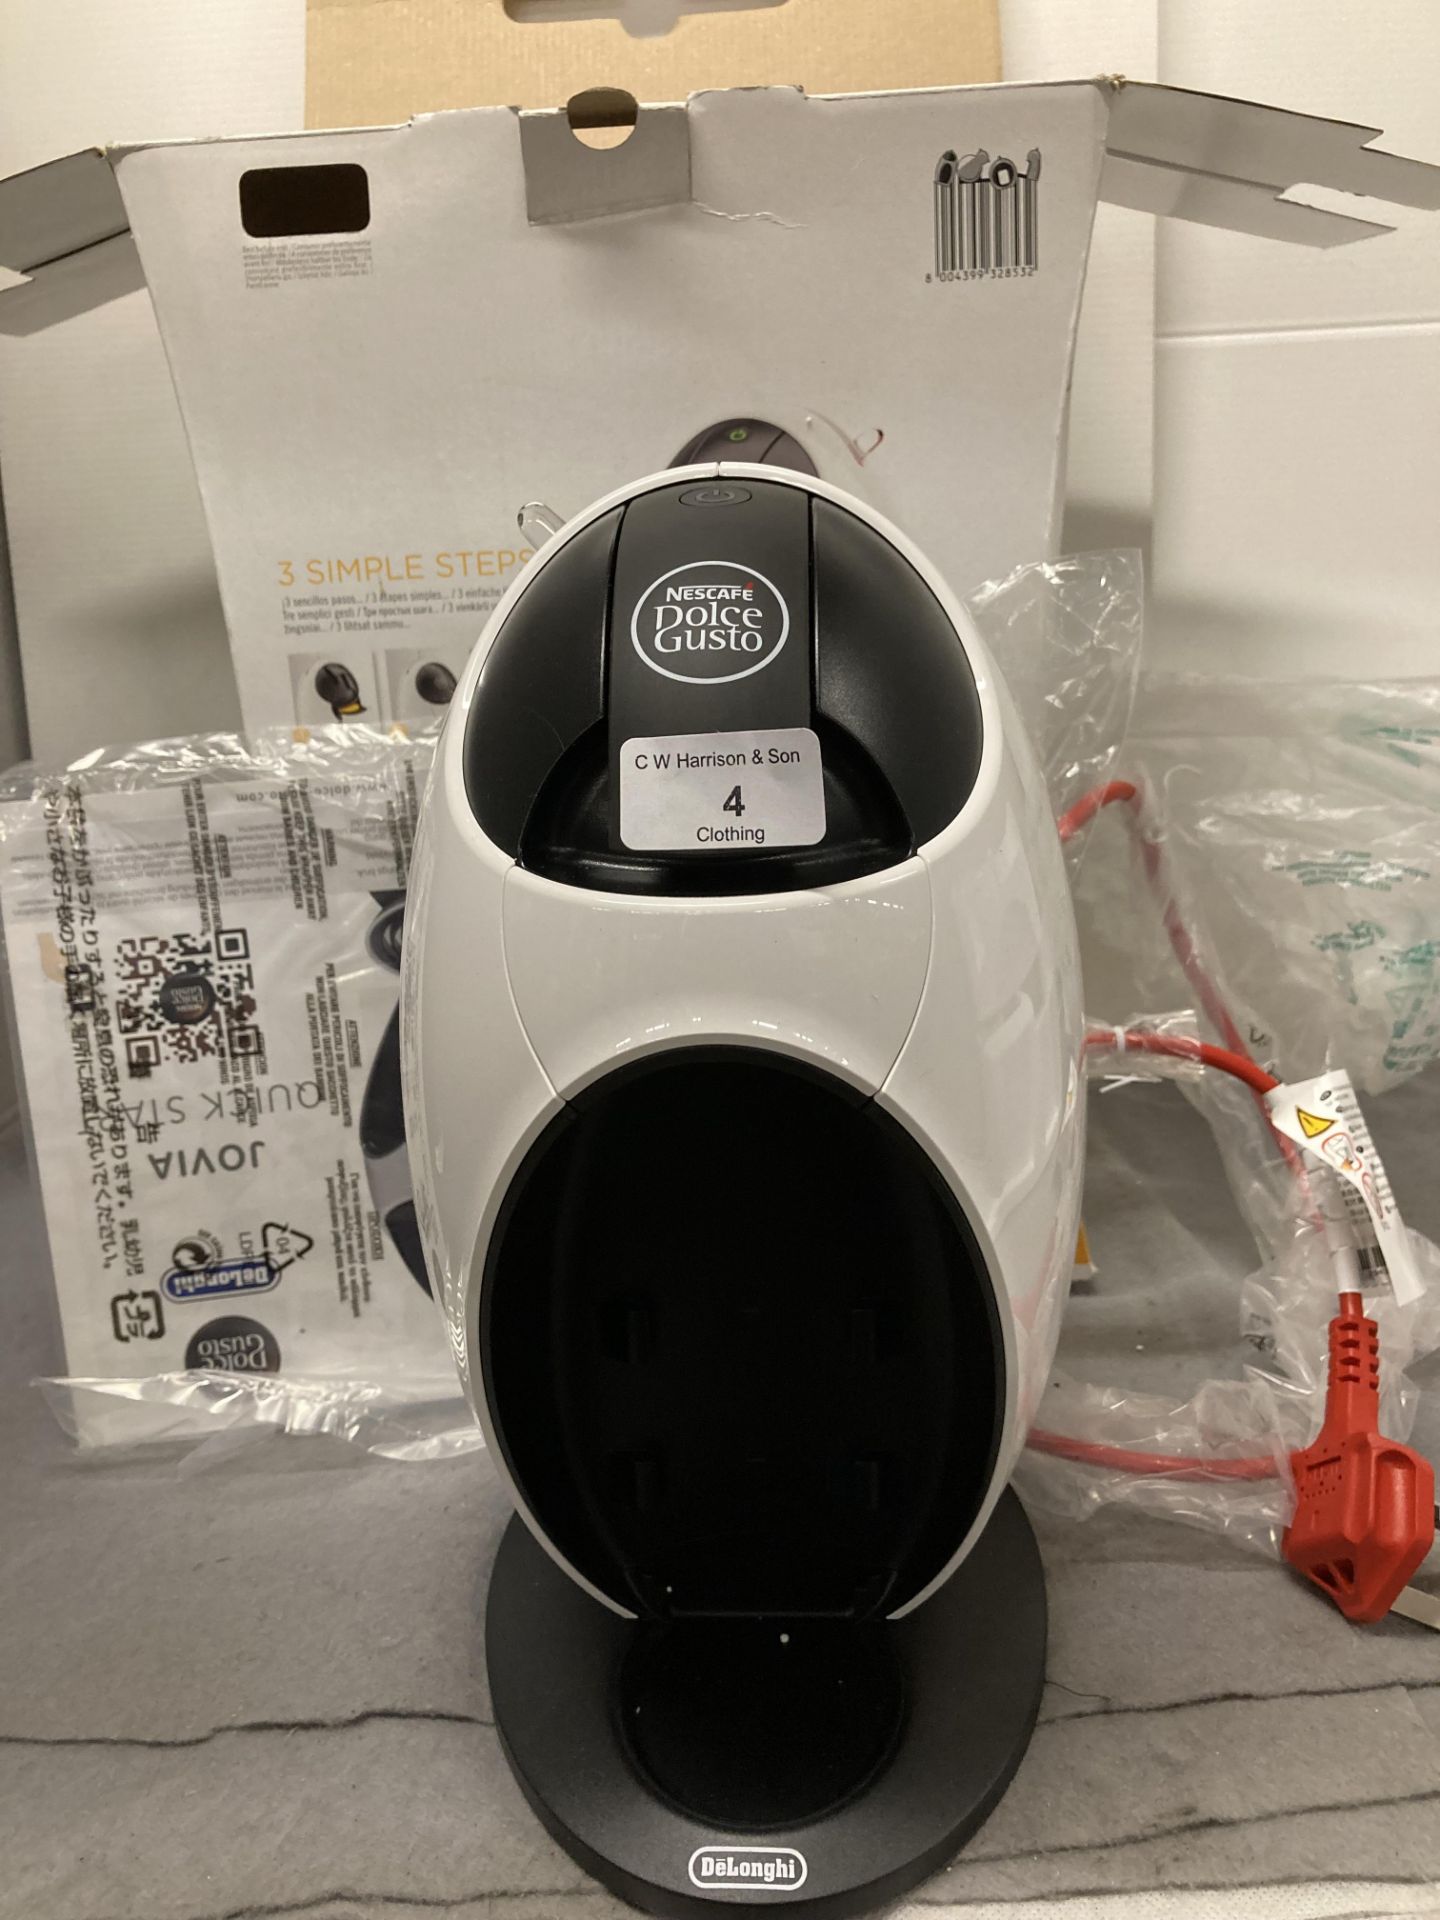 De Longhi Nescafe Dolce Gusto coffee machine in box *Please note the final purchase price is